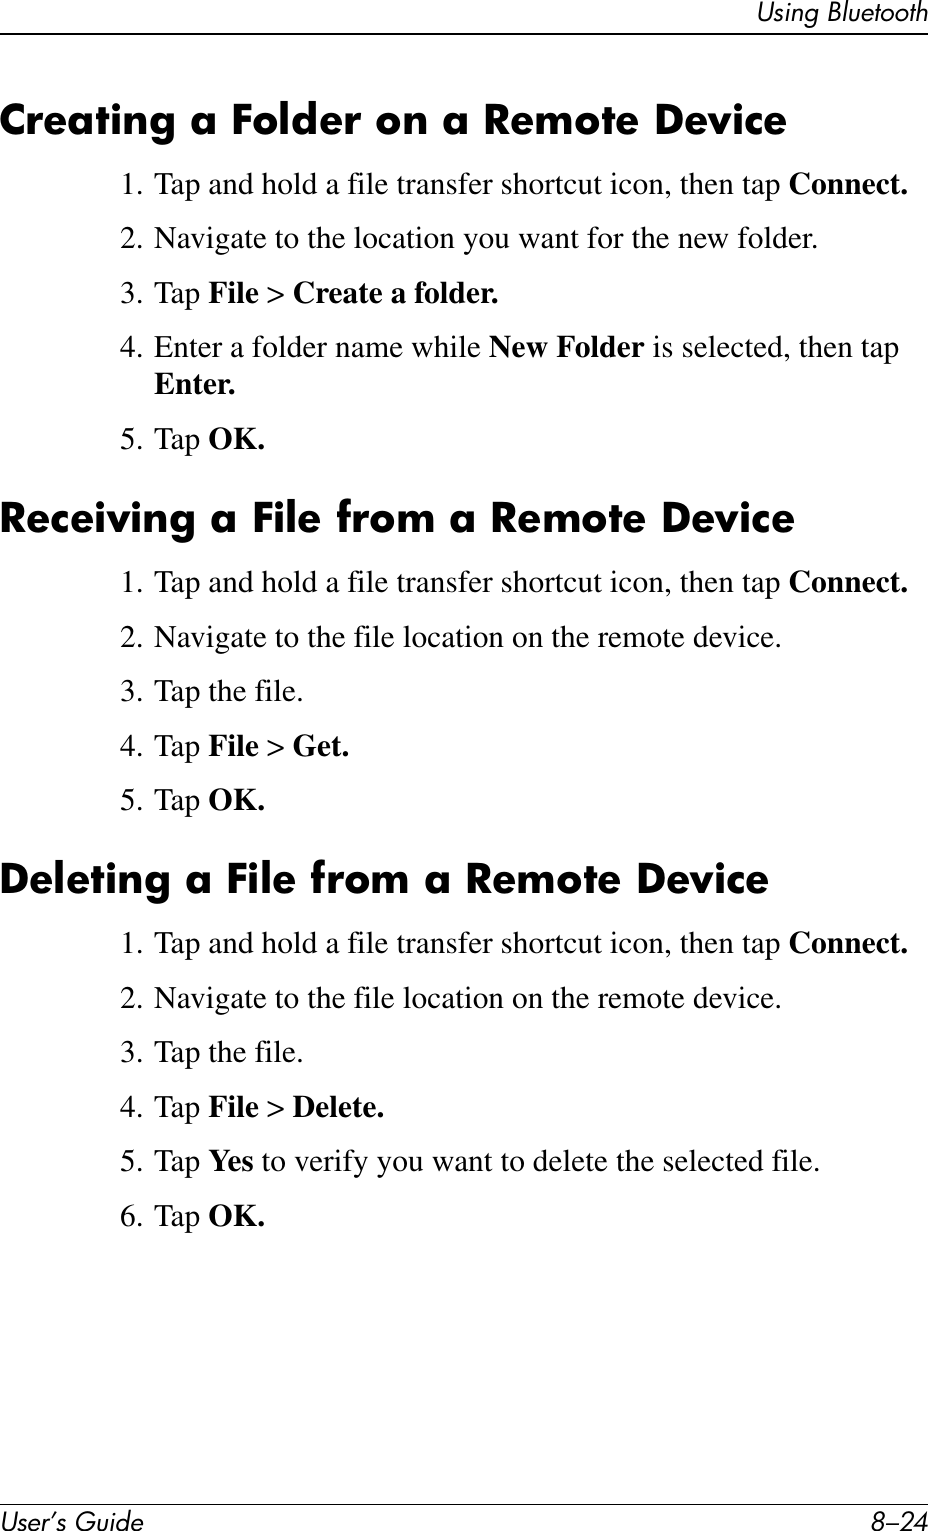 User’s Guide 8–24Using BluetoothCreating a Folder on a Remote Device1. Tap and hold a file transfer shortcut icon, then tap Connect.2. Navigate to the location you want for the new folder.3. Tap File &gt; Create a folder.4. Enter a folder name while New Folder is selected, then tap Enter.5. Tap OK.Receiving a File from a Remote Device1. Tap and hold a file transfer shortcut icon, then tap Connect.2. Navigate to the file location on the remote device.3. Tap the file.4. Tap File &gt; Get.5. Tap OK.Deleting a File from a Remote Device1. Tap and hold a file transfer shortcut icon, then tap Connect.2. Navigate to the file location on the remote device.3. Tap the file.4. Tap File &gt; Delete.5. Tap Ye s  to verify you want to delete the selected file.6. Tap OK.